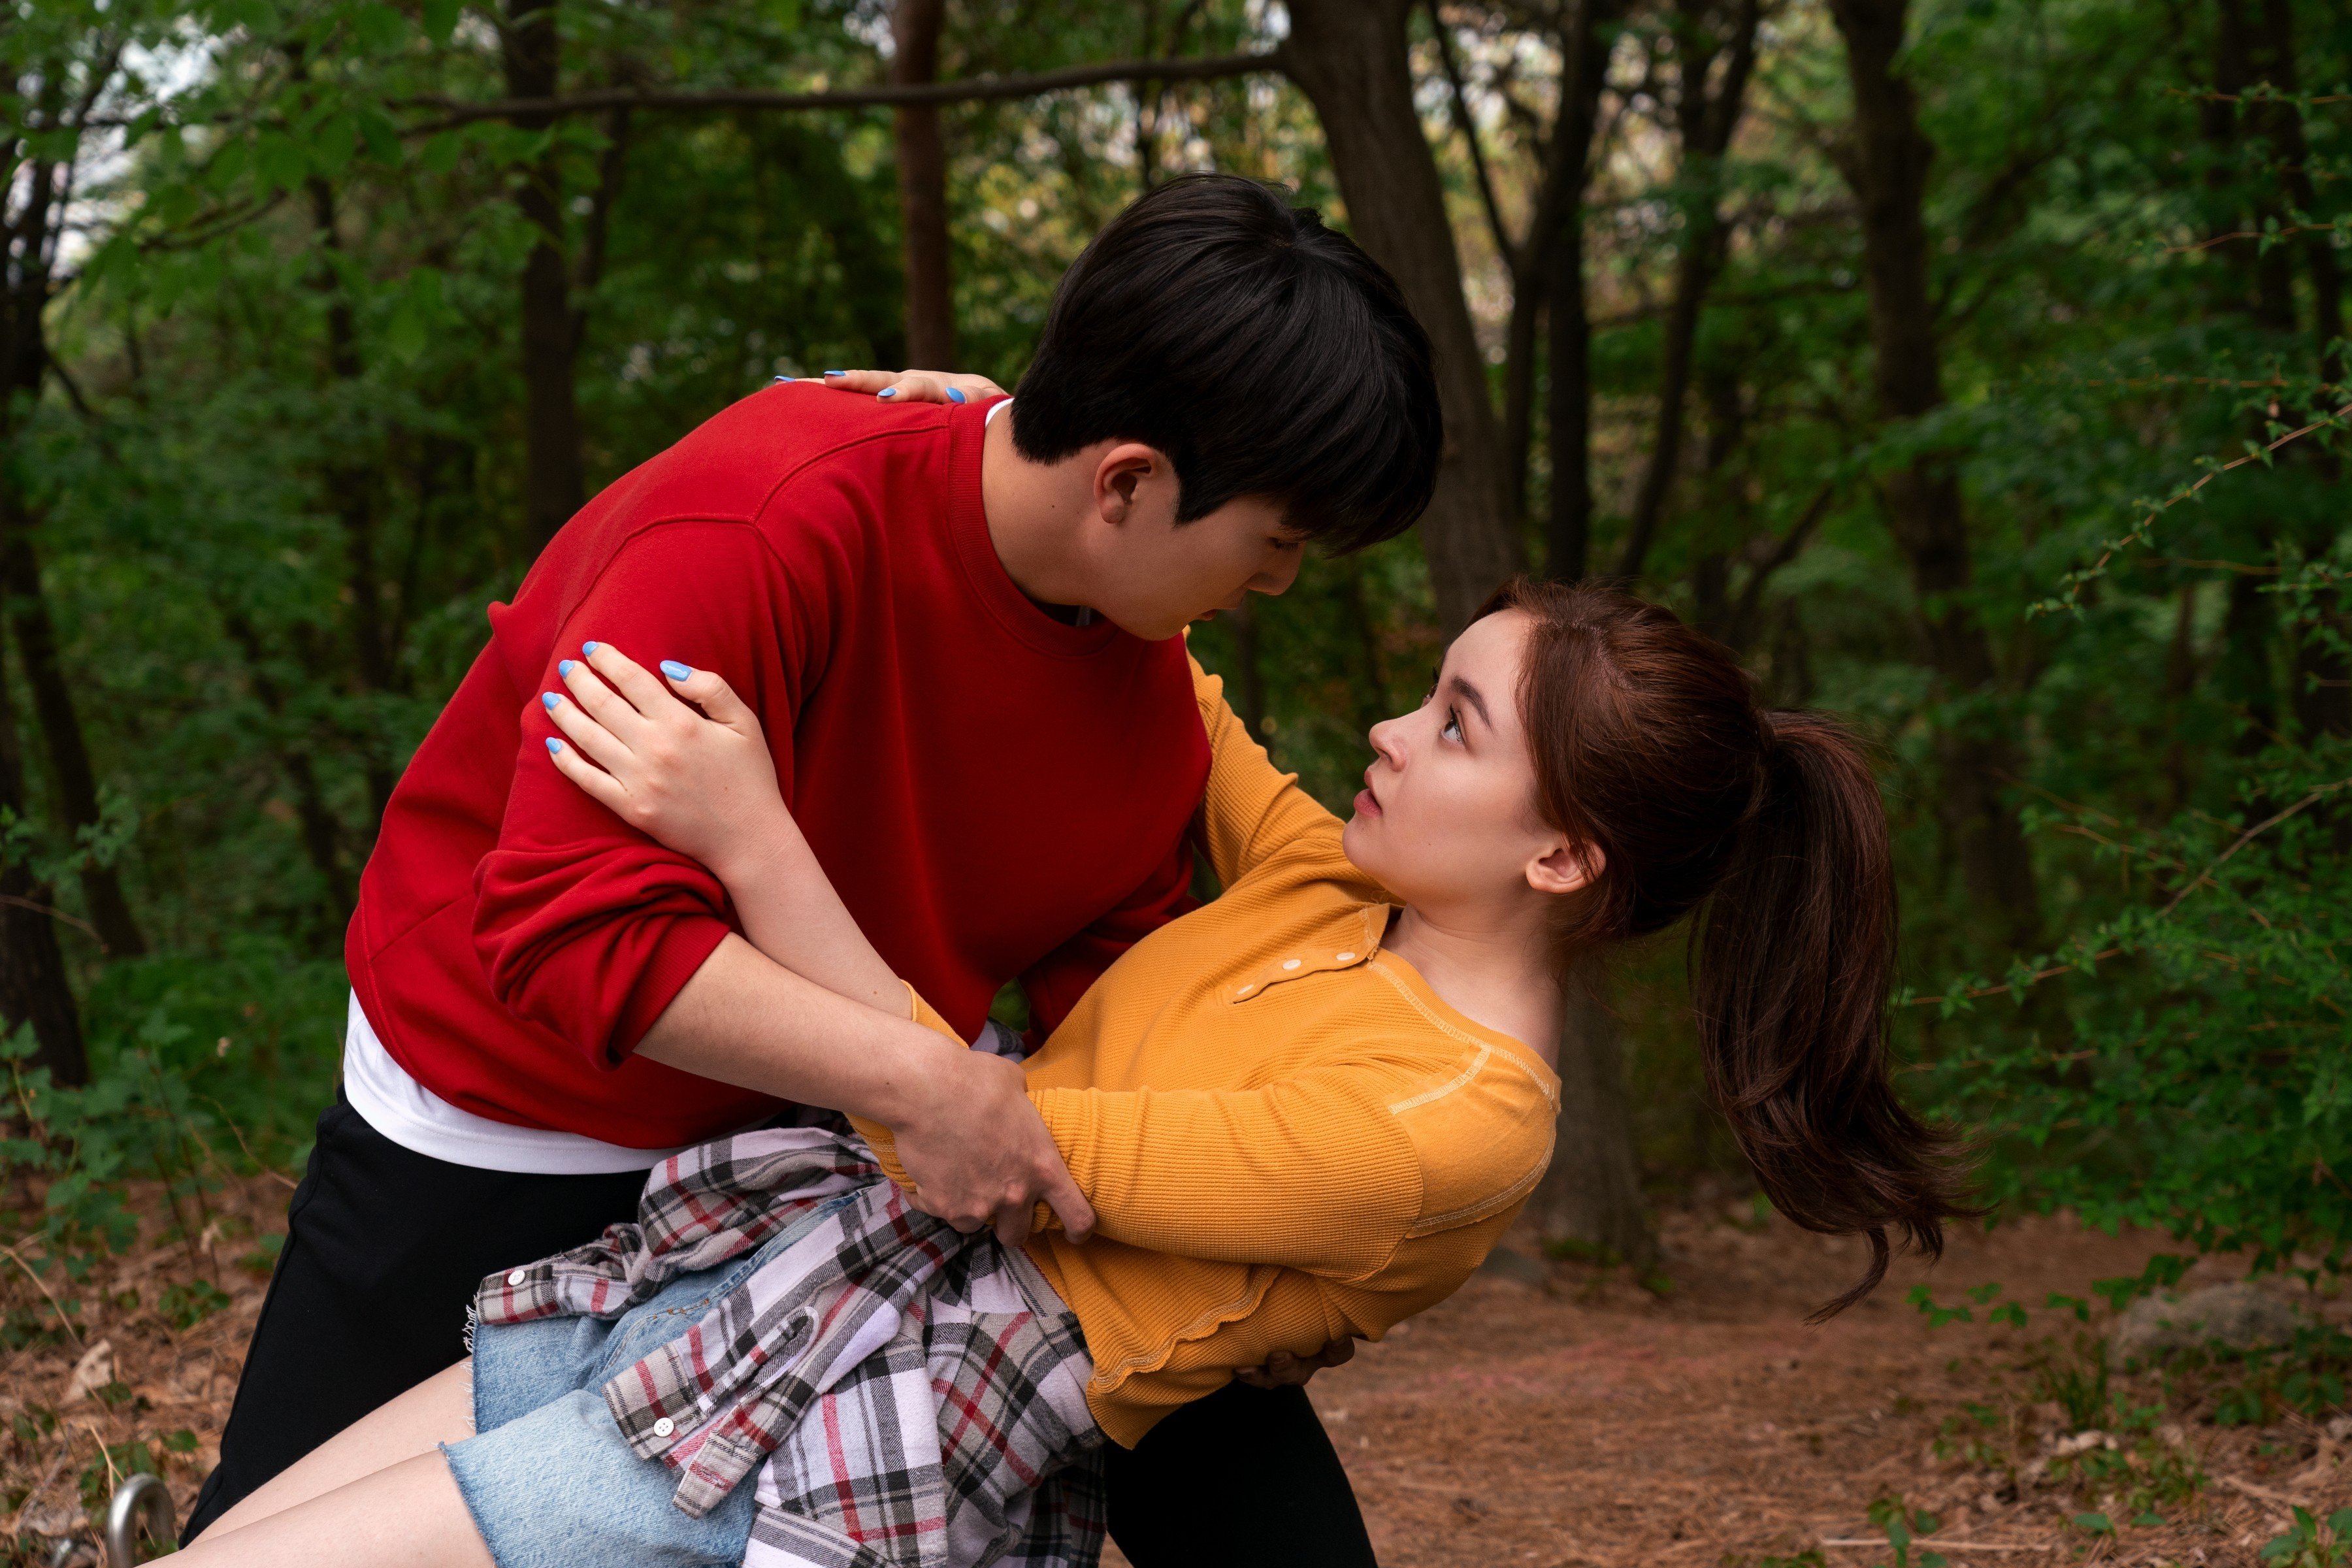 Choi Min-yeong (left) as Dae and Anna Cathcart as Kitty Song Covey in a still from “XO, Kitty”. Photo: Park Young-Sol/Netflix.